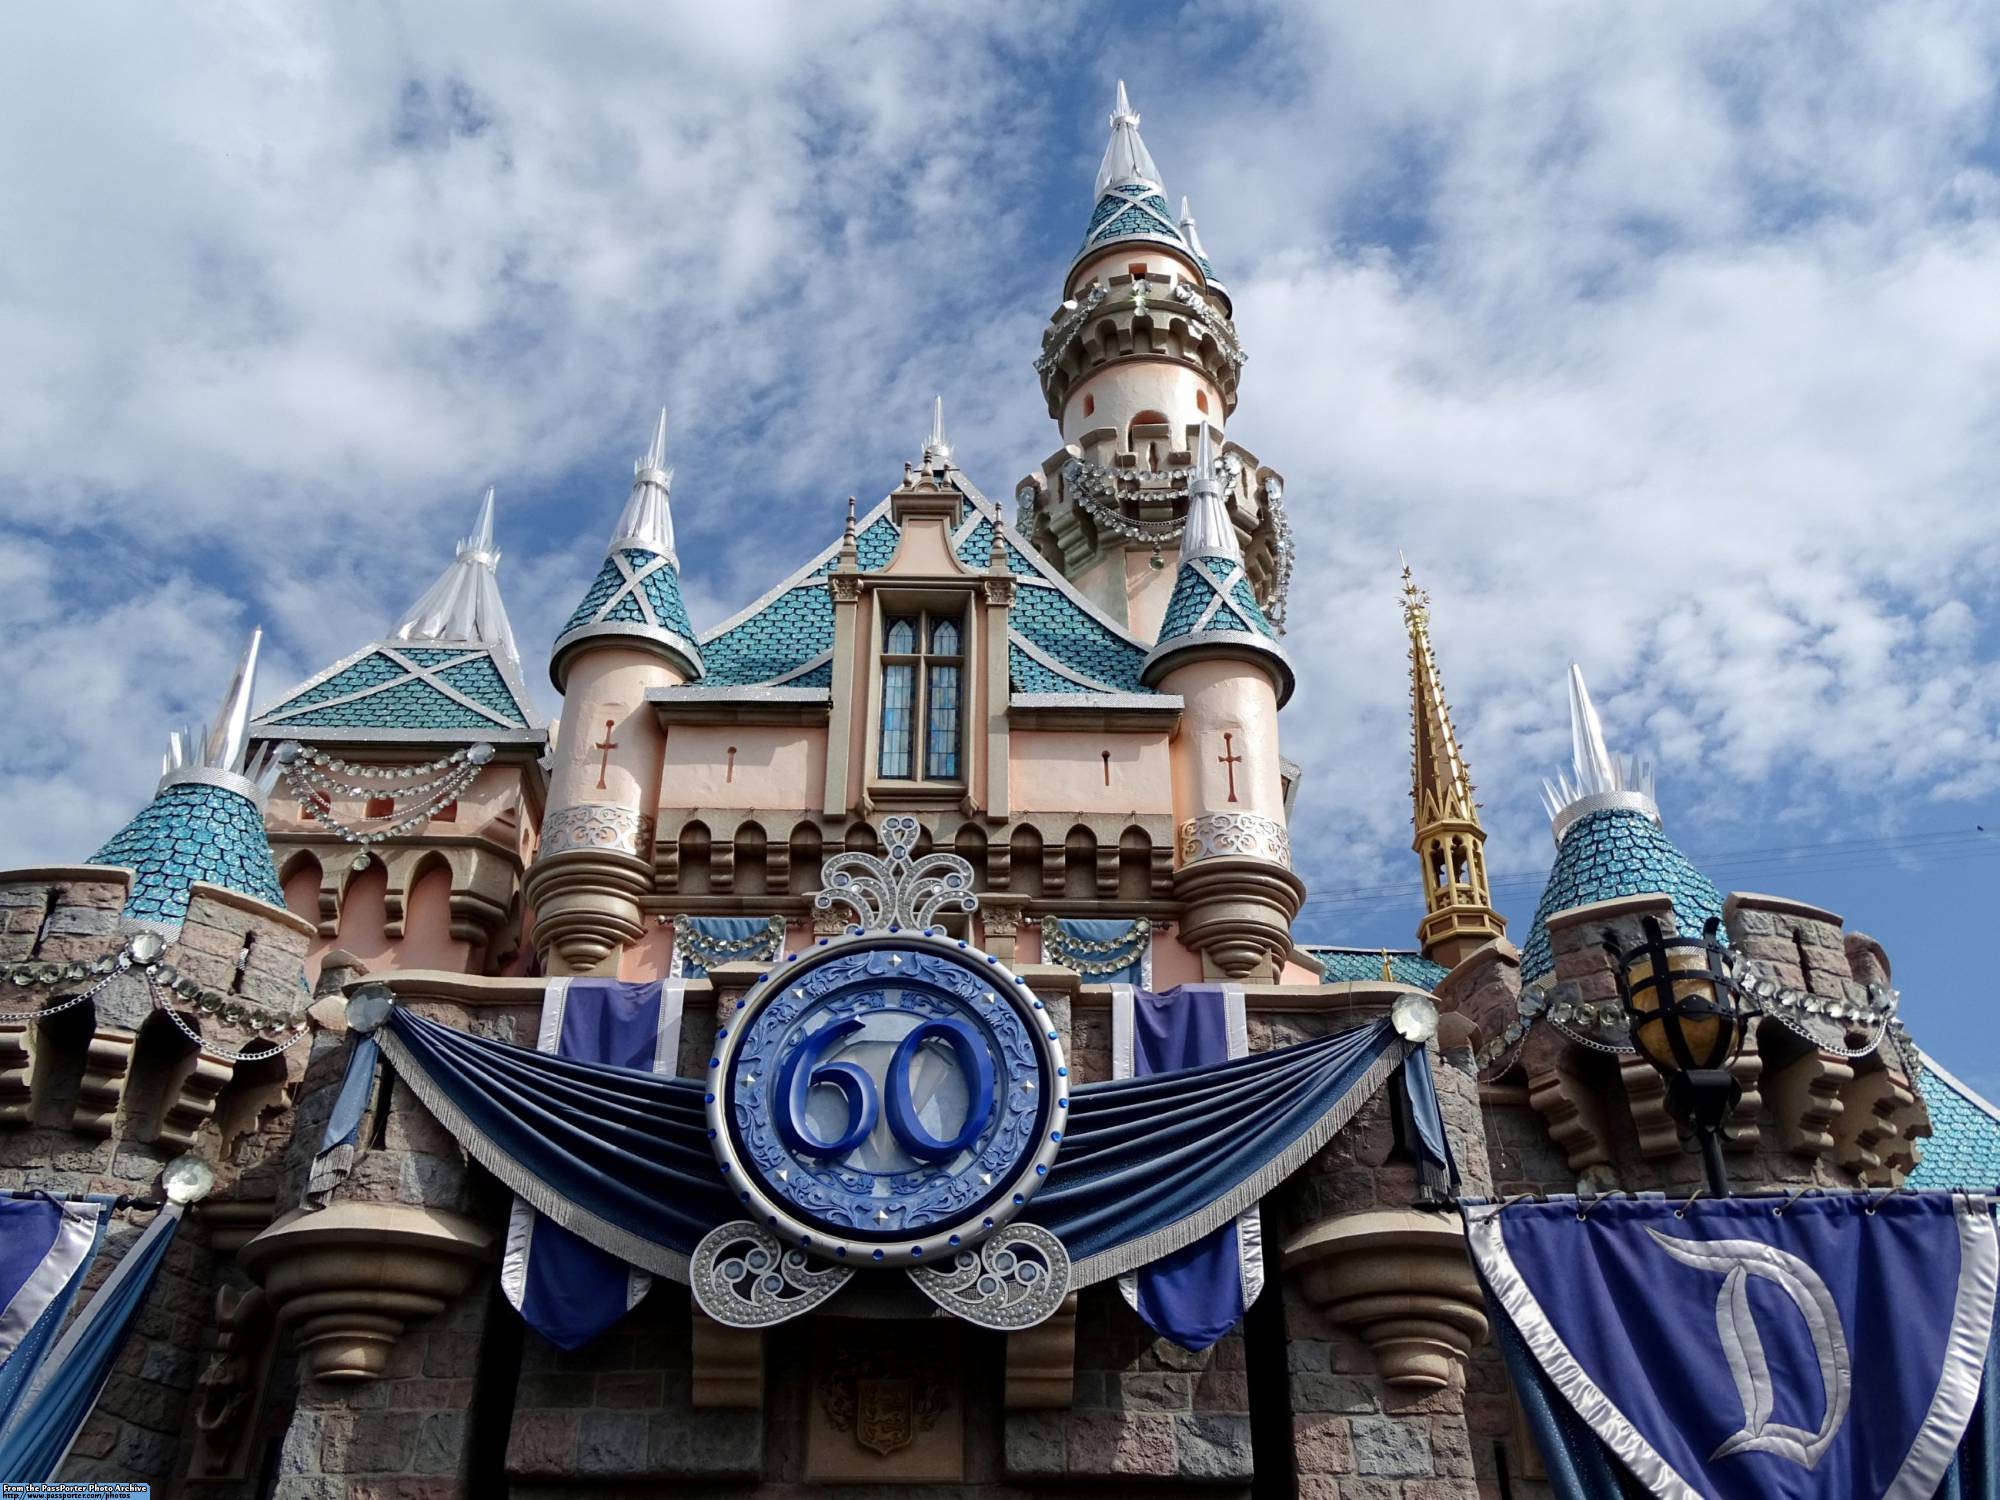 Learn how to stay cool and beat the heat at Disneyland |PassPorter.com